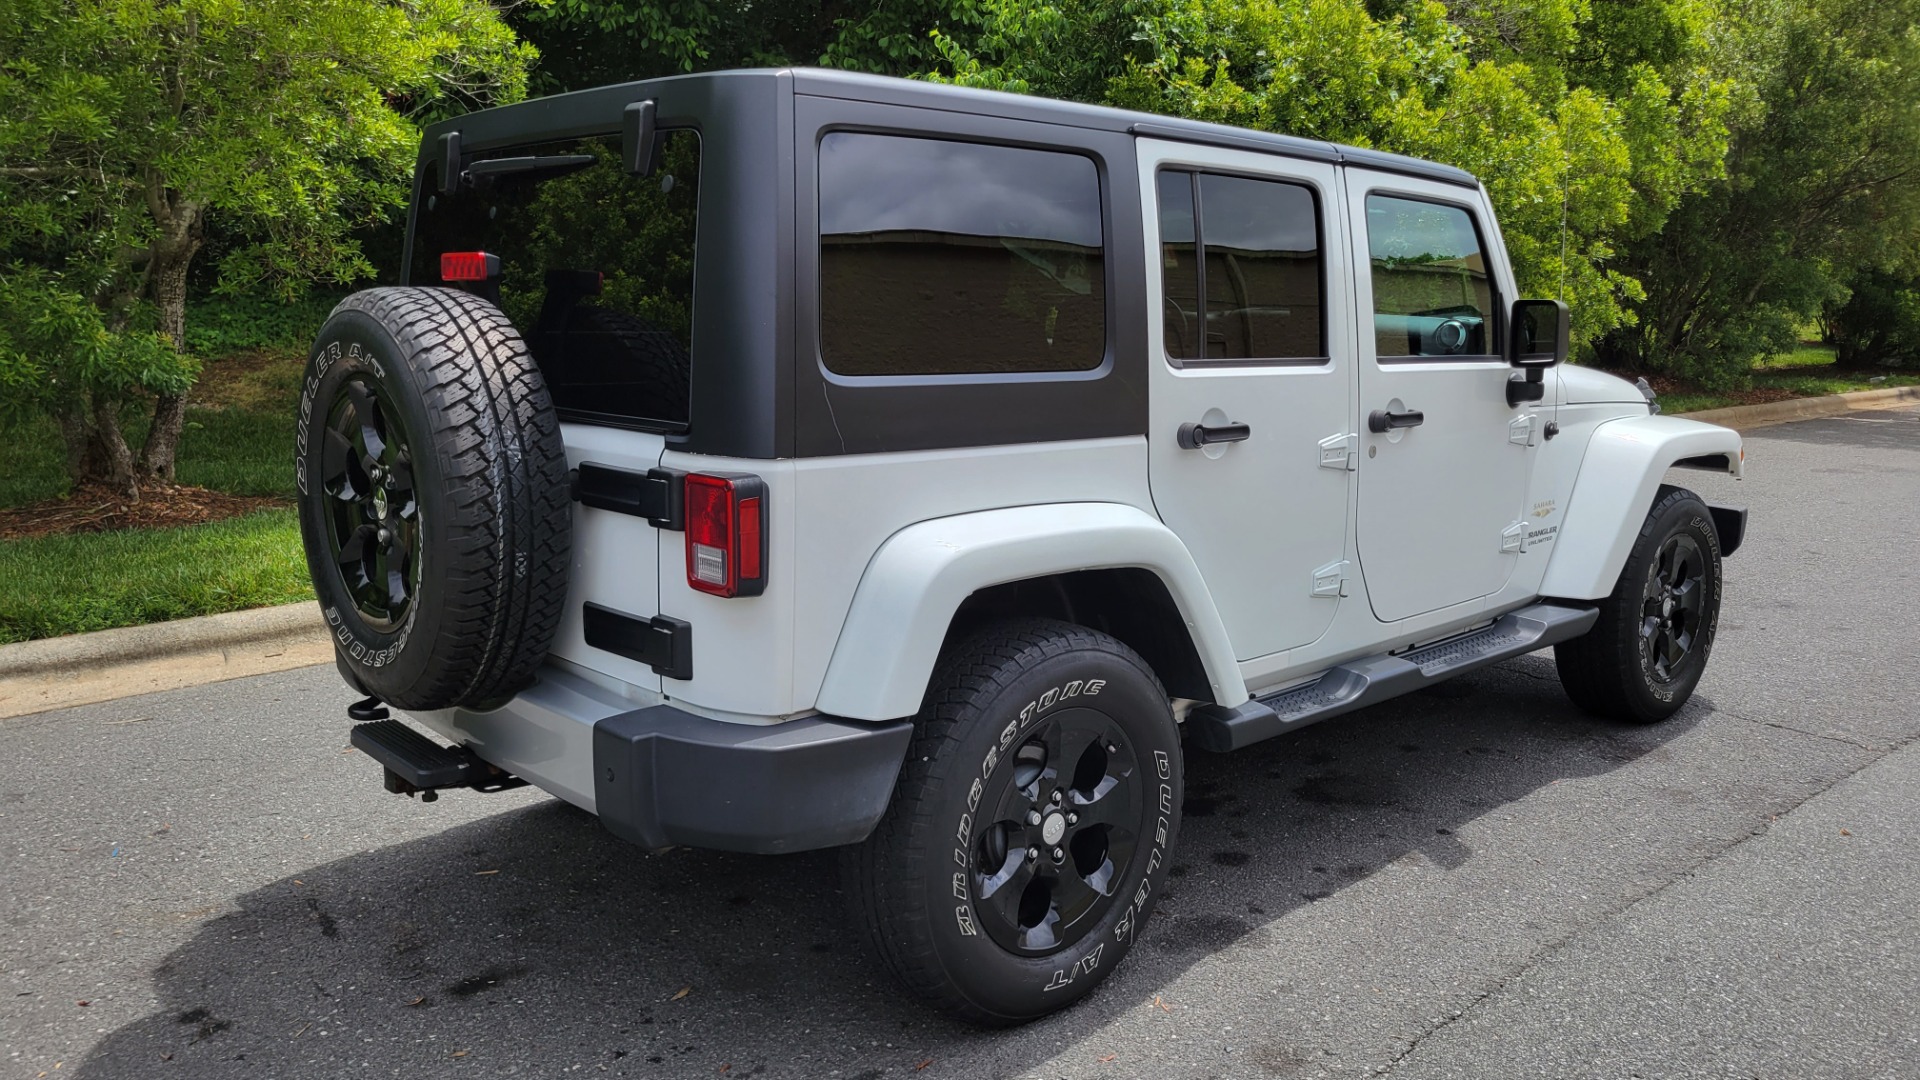 Used 2015 Jeep WRANGLER UNLIMITED SAHARA 4X4 / 3.6L / AUTO / 3-PC HARD-TOP / NAVIGATION for sale $33,295 at Formula Imports in Charlotte NC 28227 4